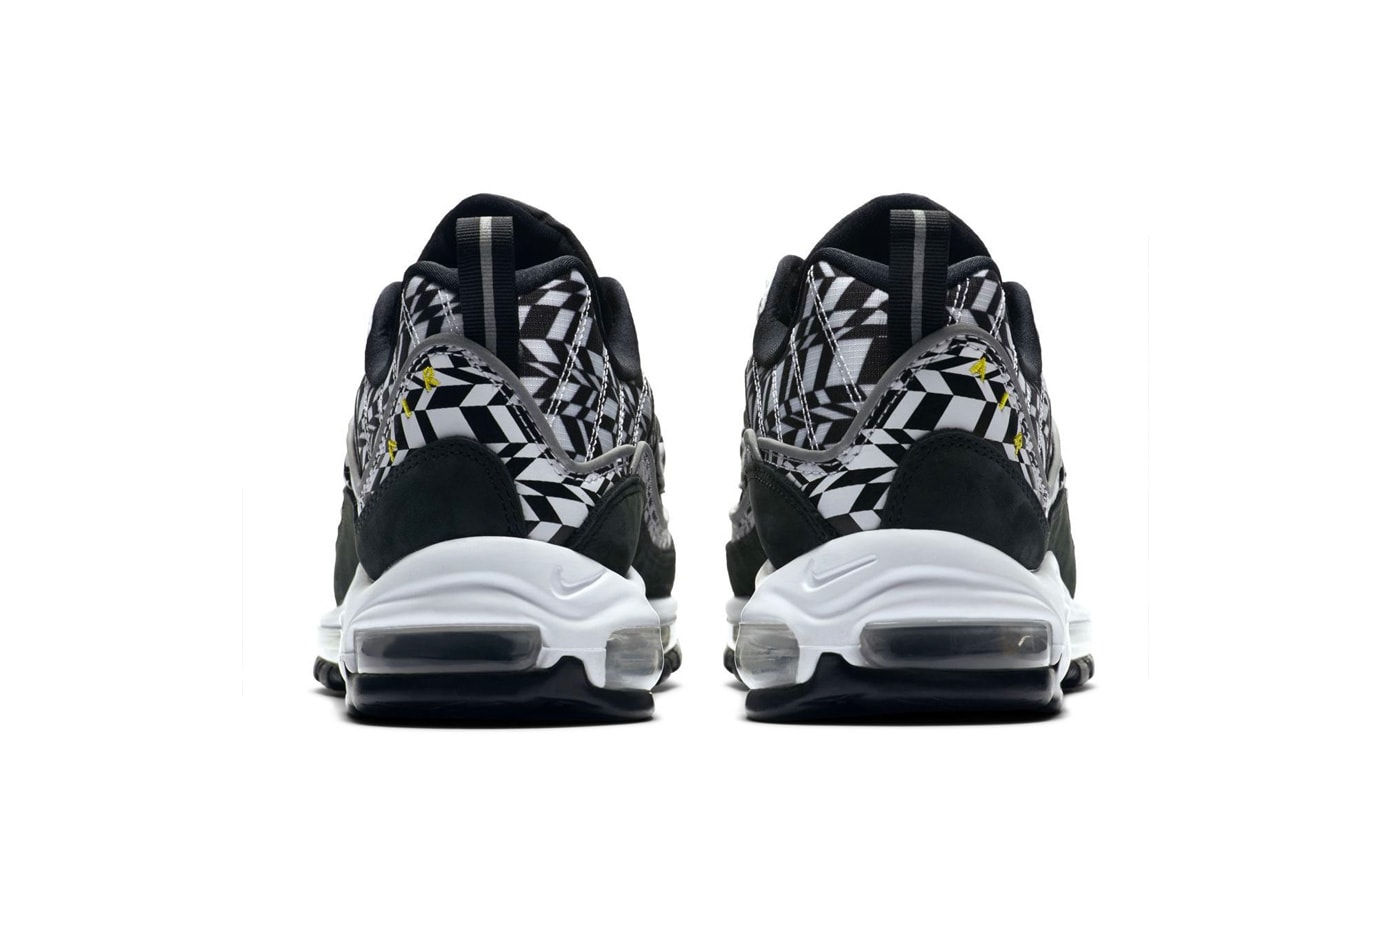 Nike Air Max 98 "AOP" Pack Release Date camo black white price all over print sneakers purchase